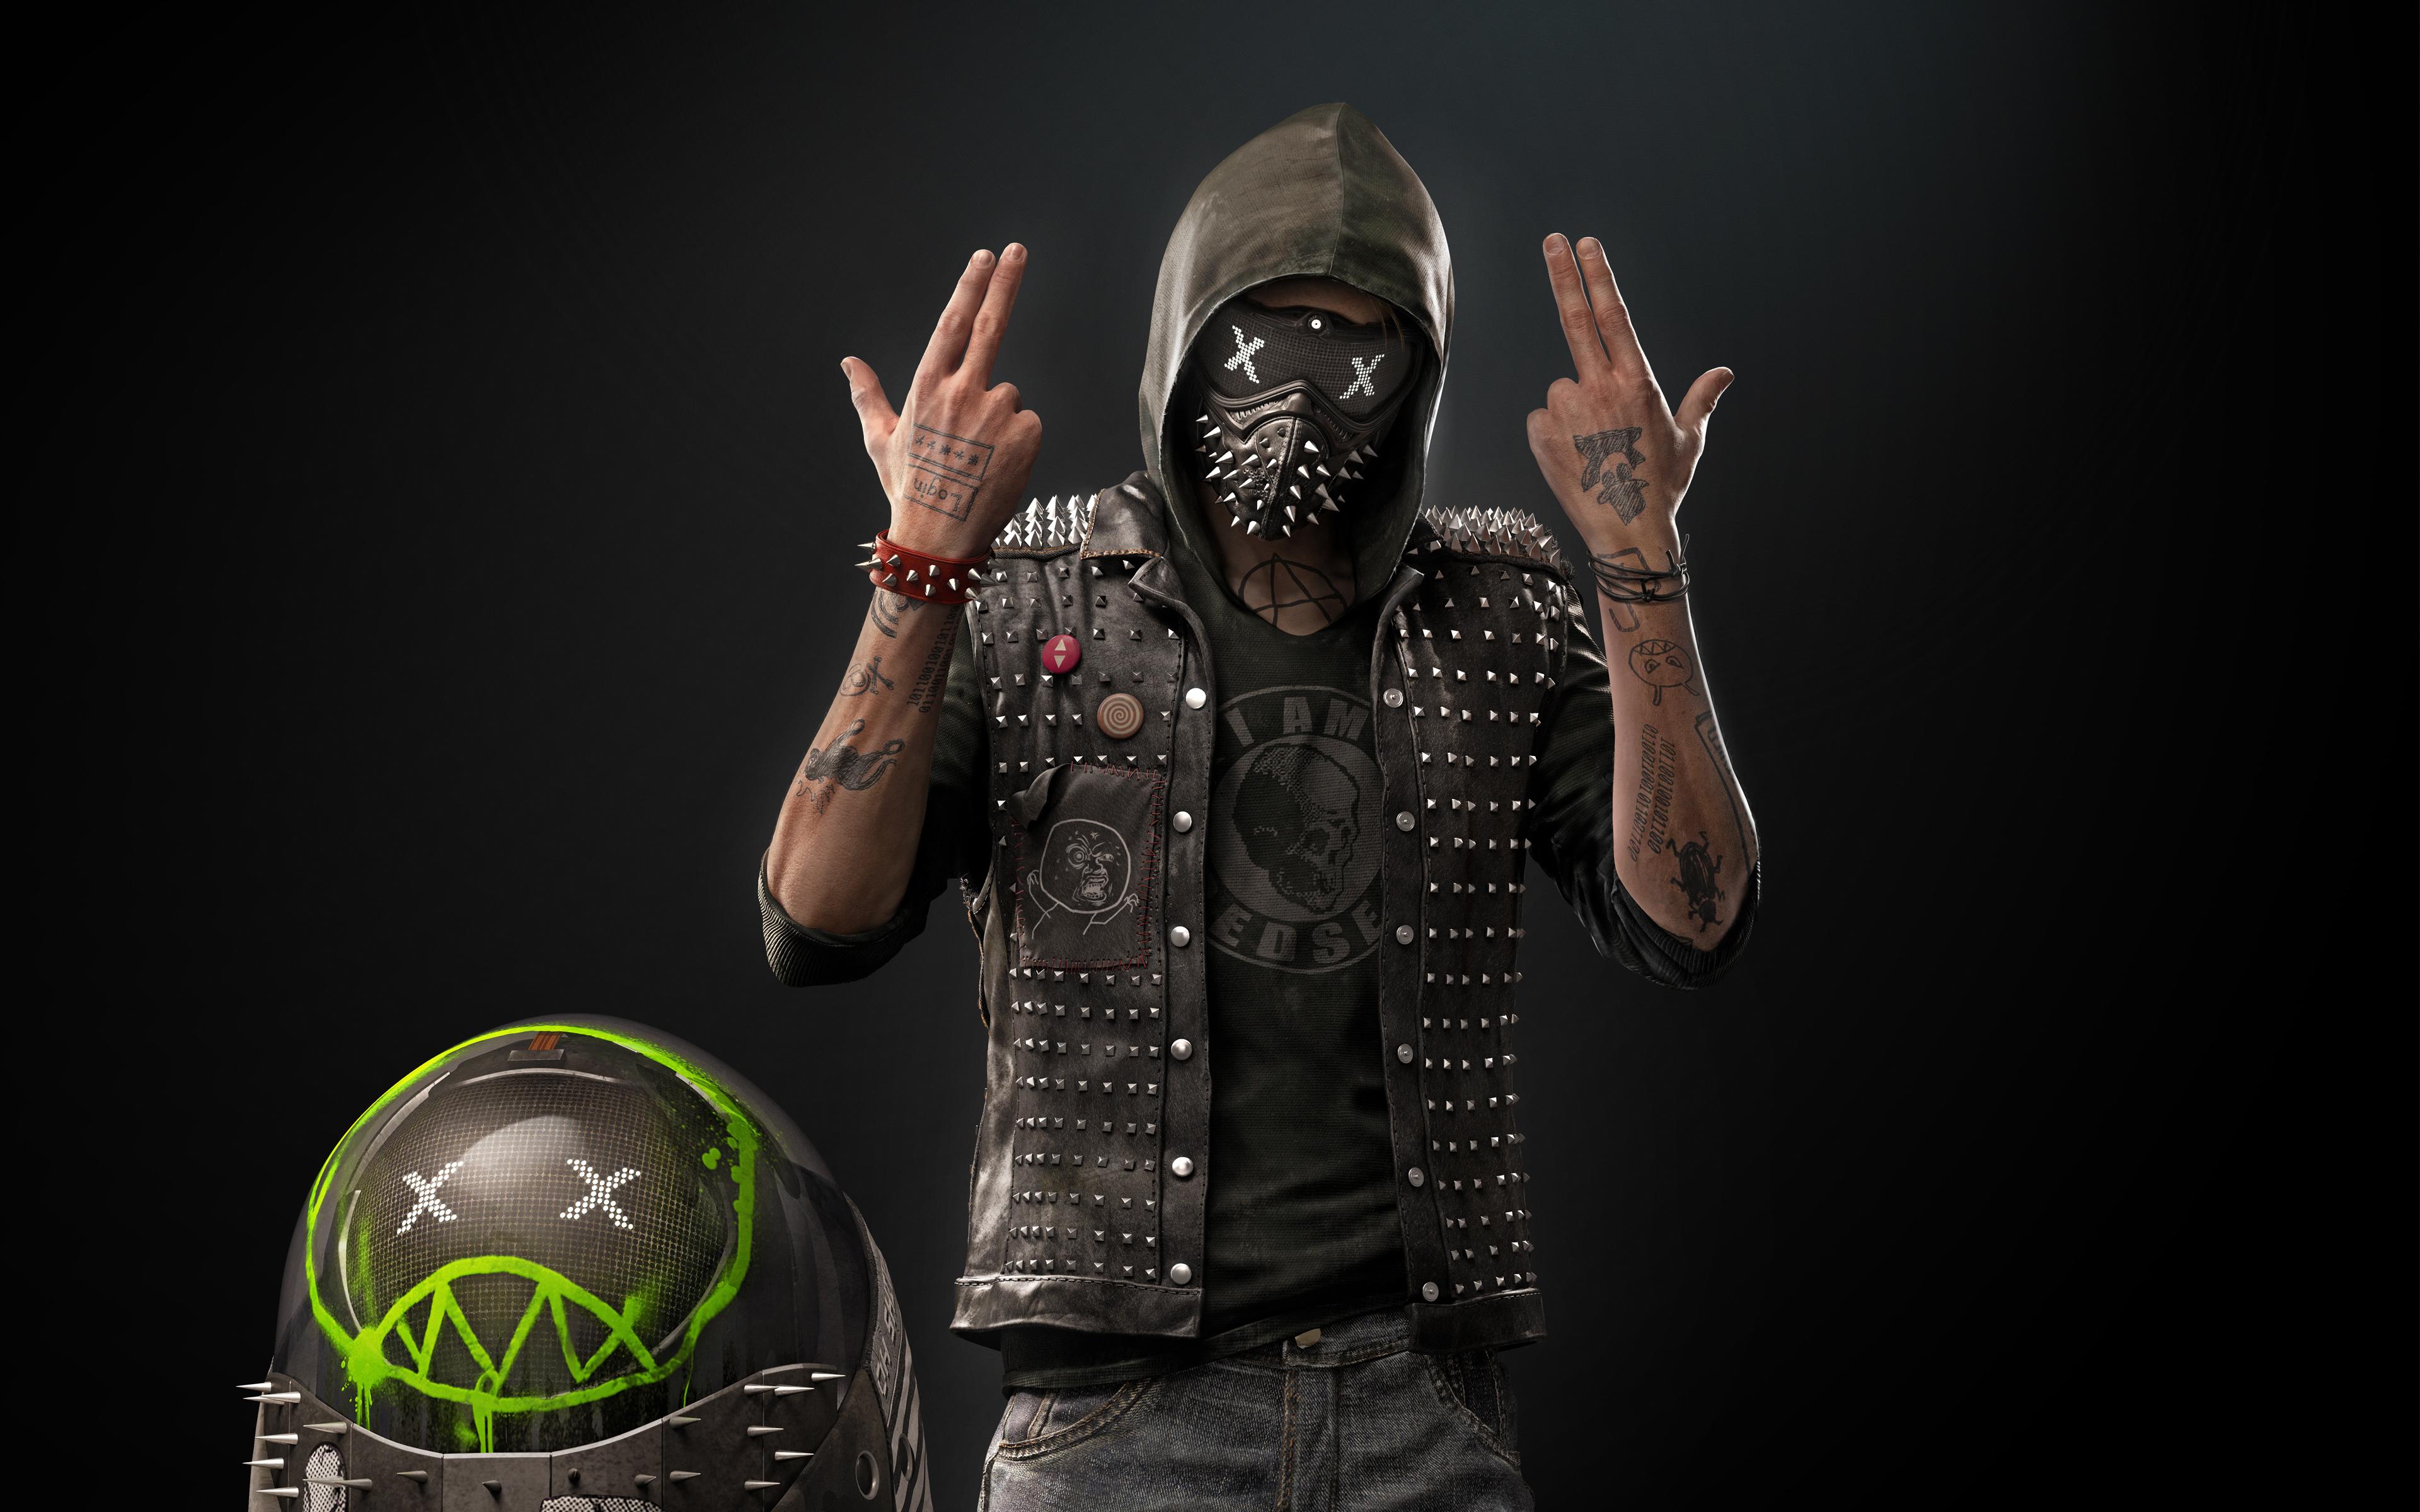 watch dogs 2, wrench (watch dogs), watch dogs, video game images